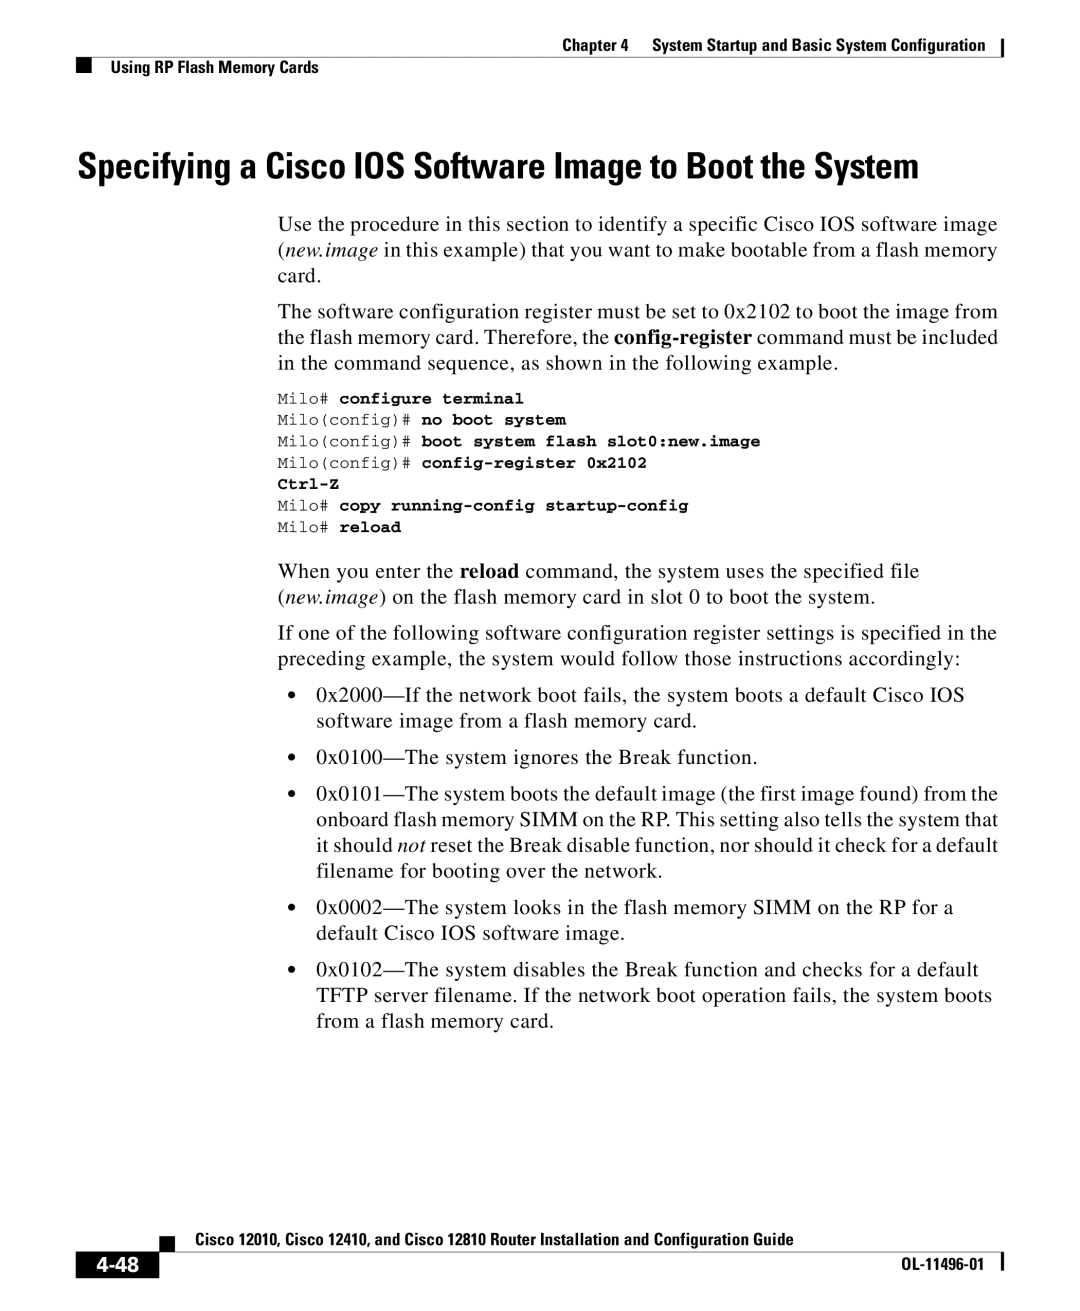 Cisco Systems 12010, 12810, 12410 manual Specifying a Cisco IOS Software Image to Boot the System 